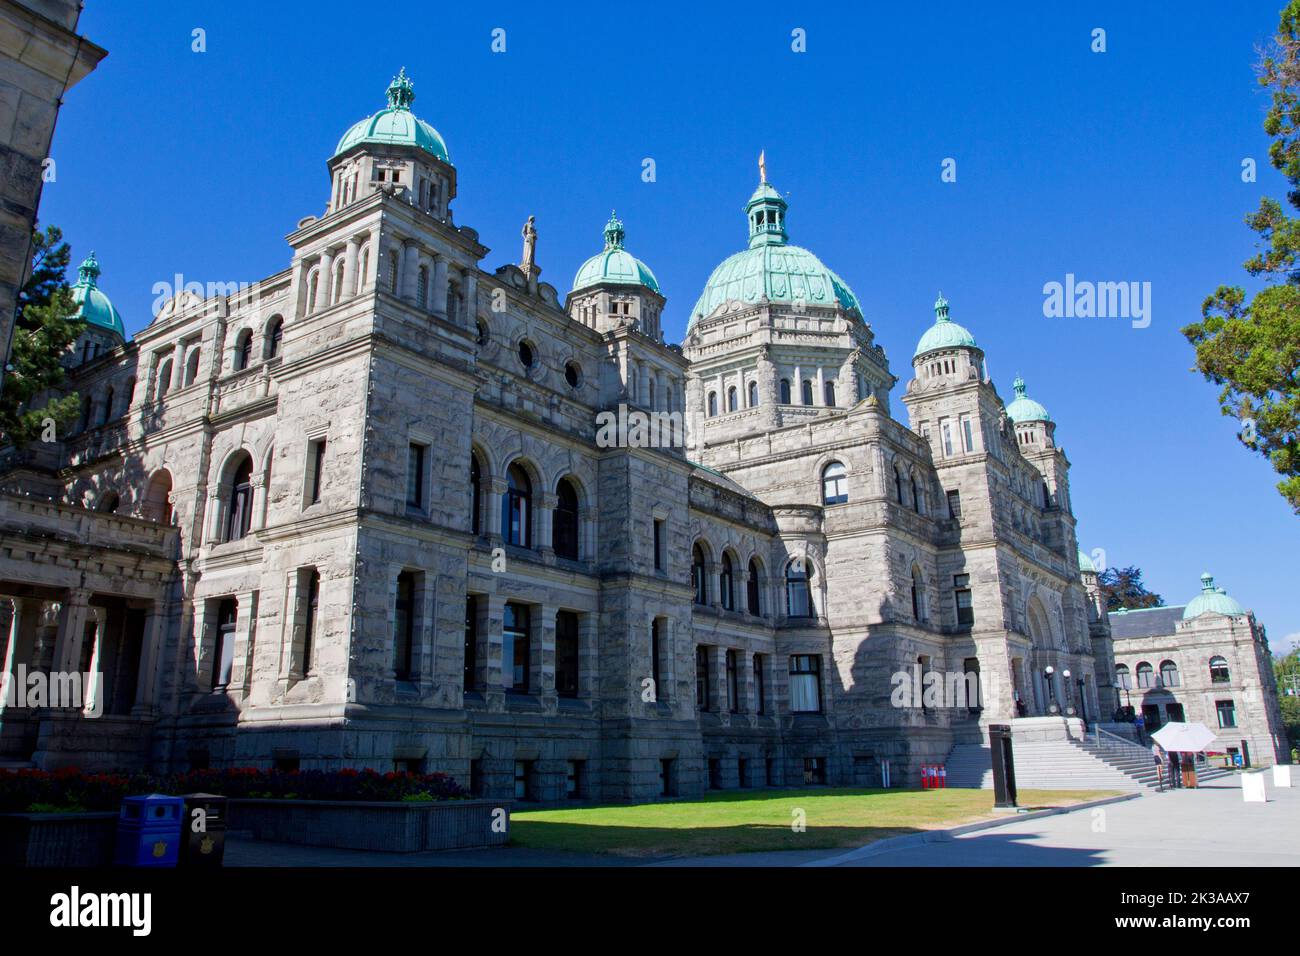 A side view of the British Columbia Parliament Buildings in Victoria, British Columbia, Canada from the Menzies Street end. Stock Photo